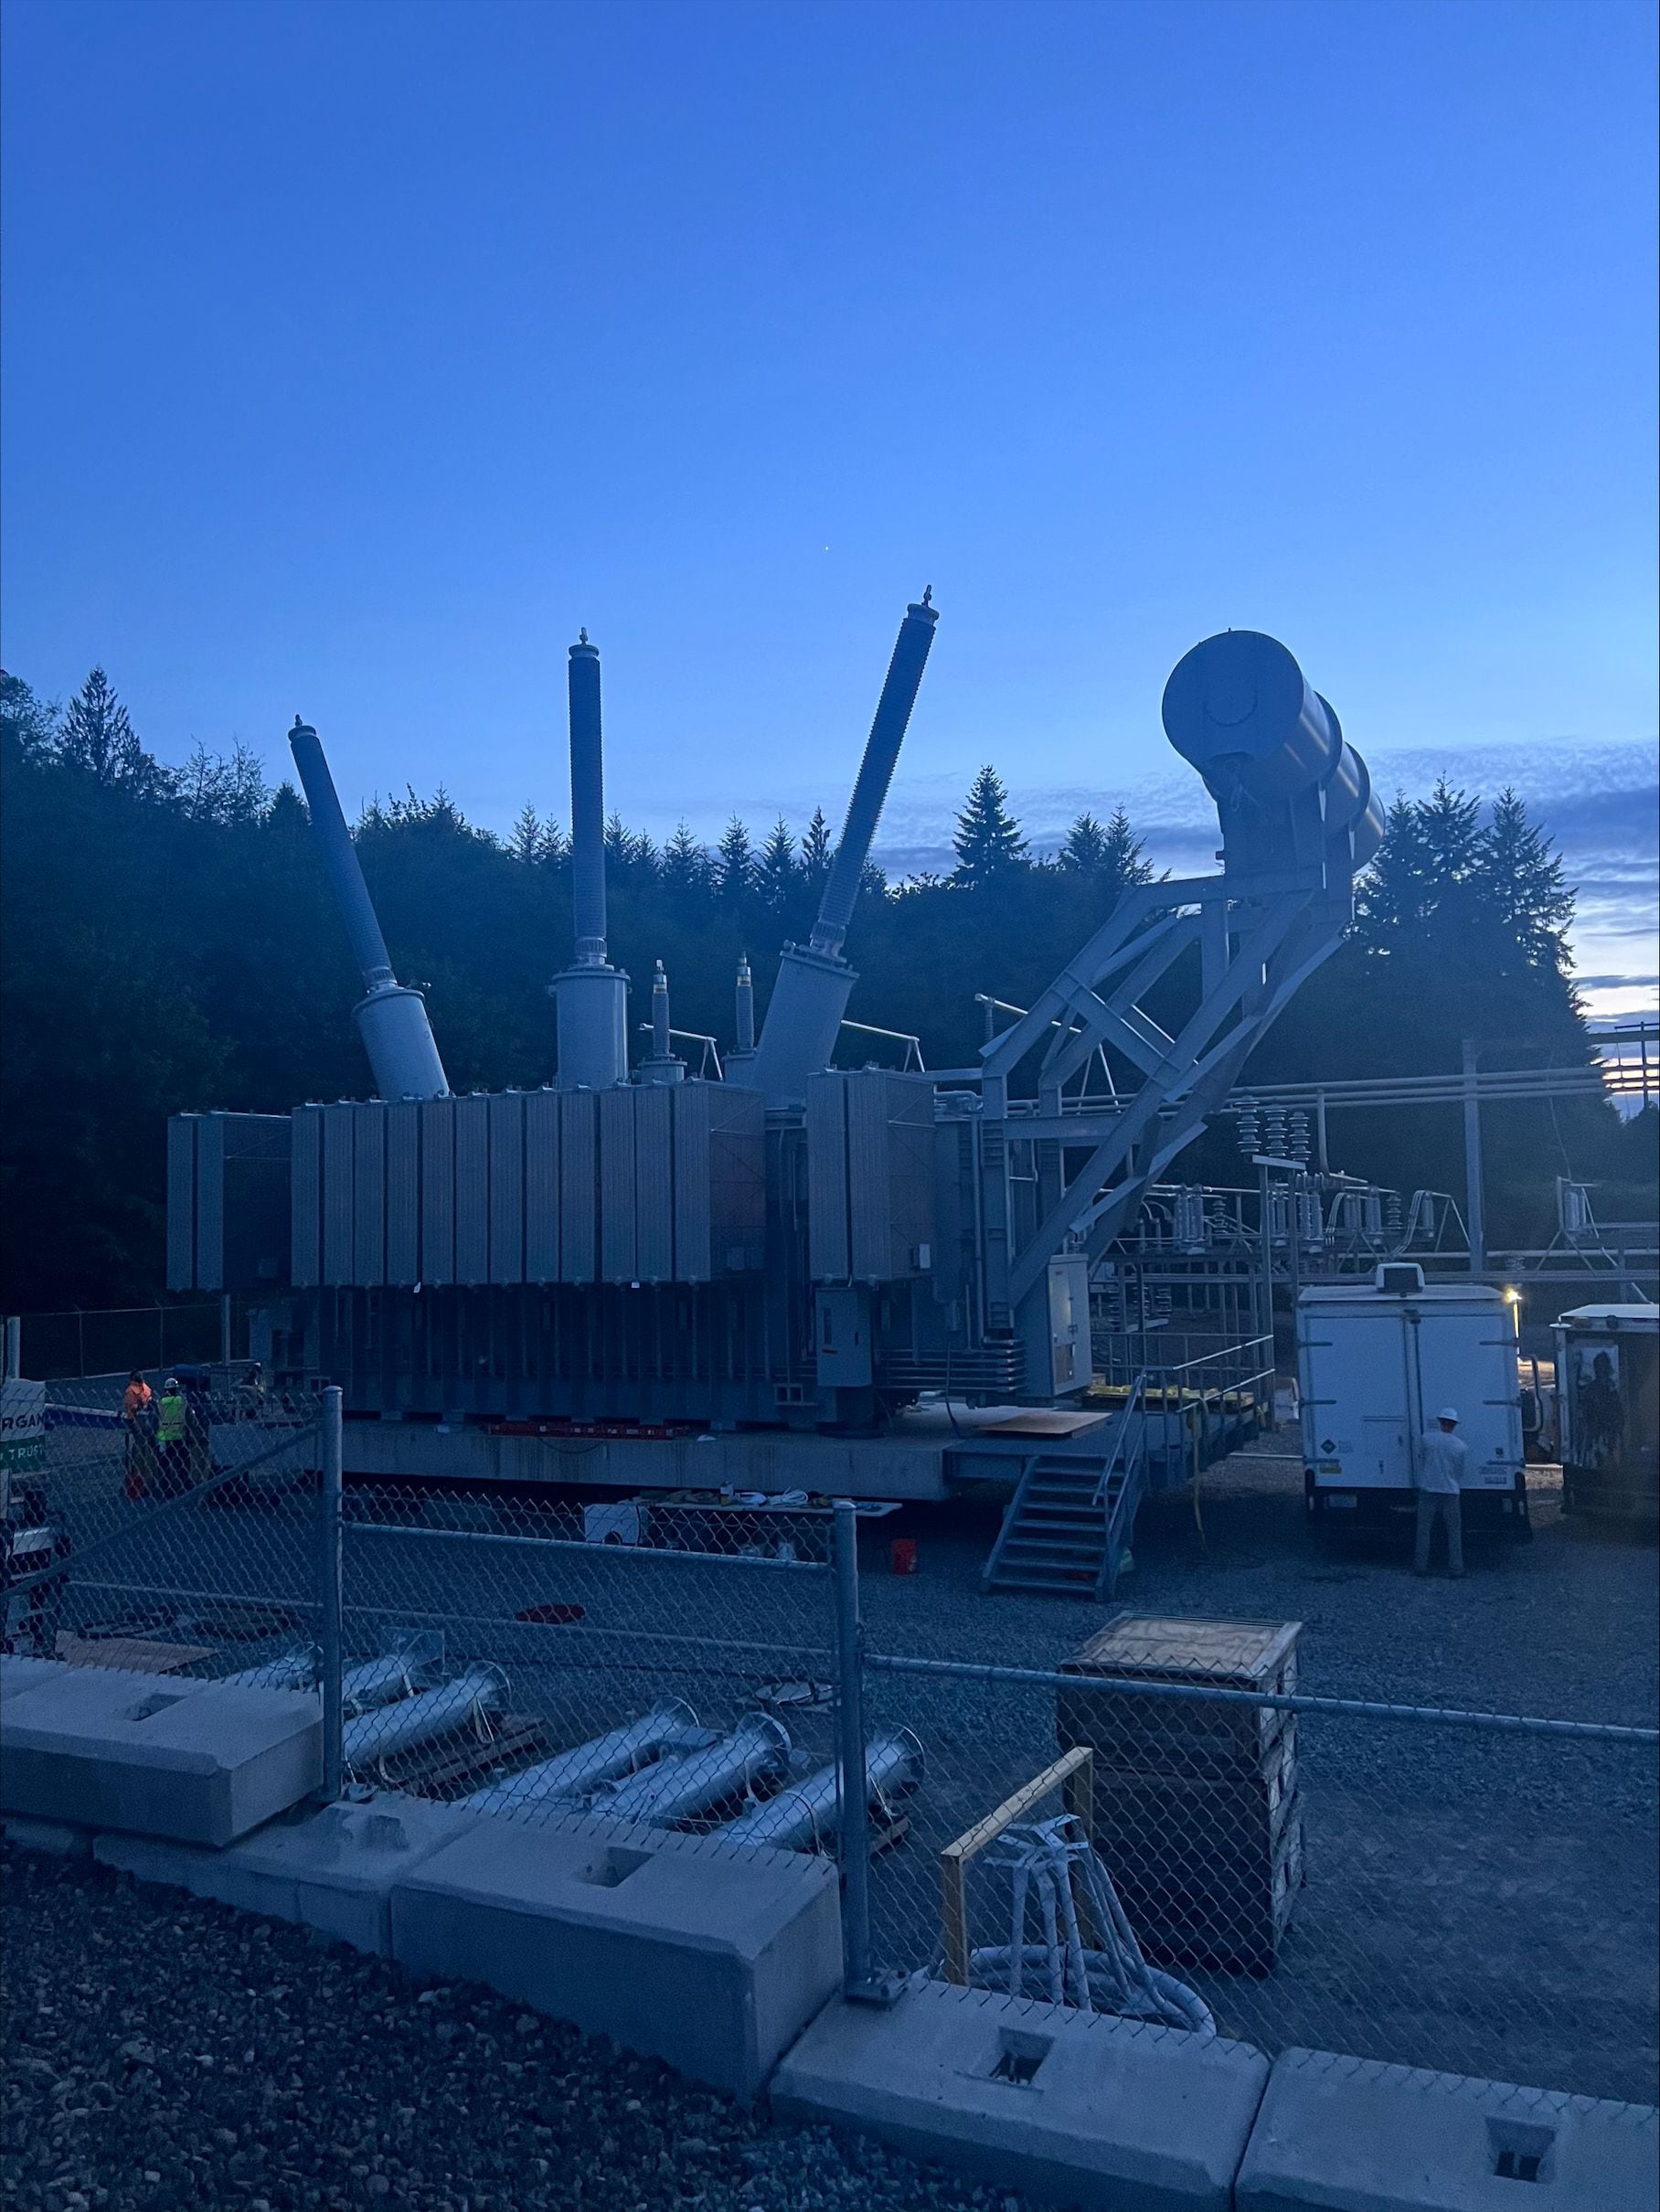 PHOTOS: PSE installs one of the biggest transformers on the West Coast in  Lewis County – KIRO 7 News Seattle